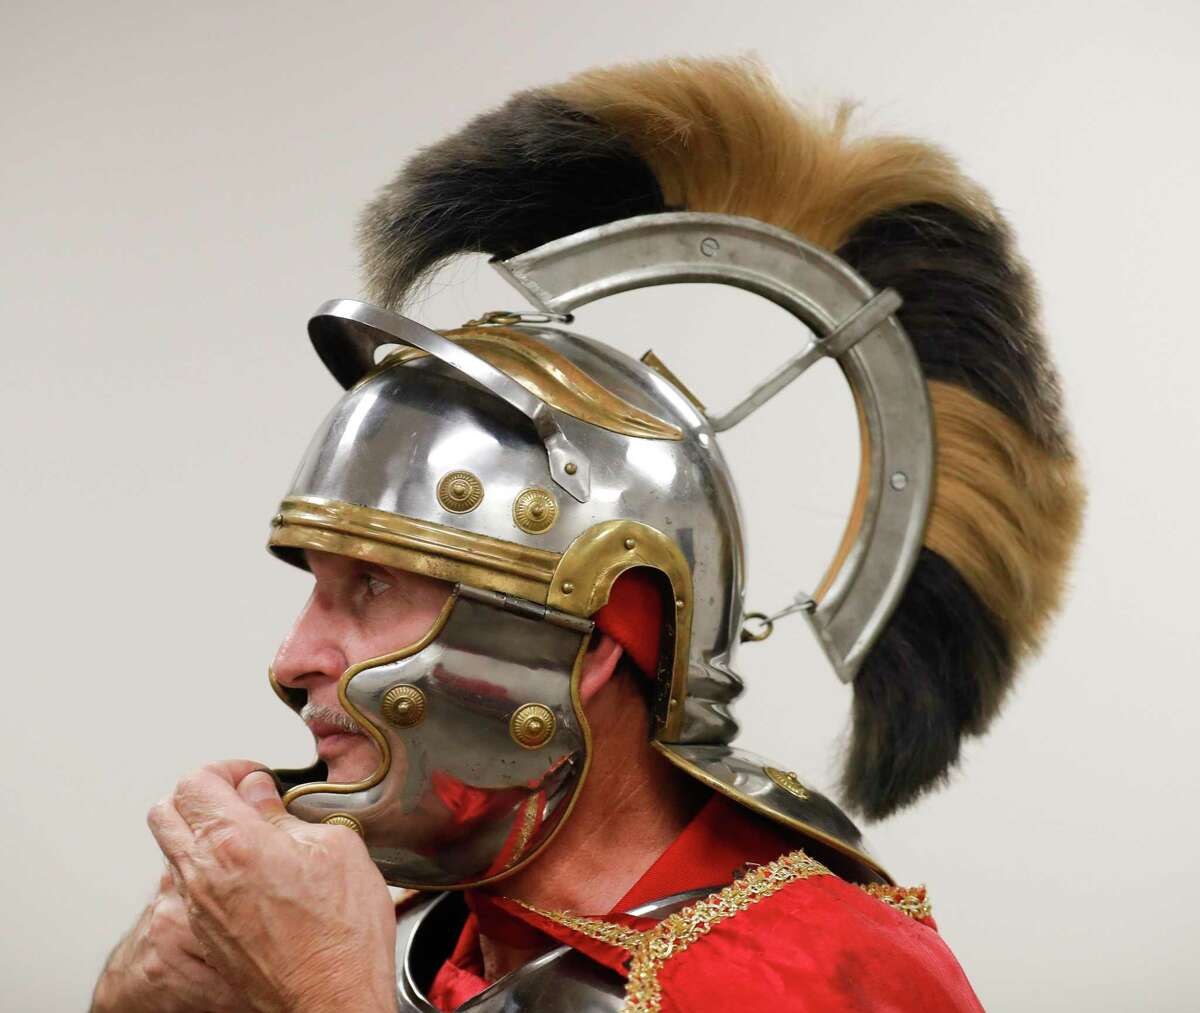 Jose Olivarez puts on his Roman guard helmet during a rehearsal for "Bethlehem City" at West Conroe Baptist Church, Wednesday, Dec. 1 2021, in Conroe. More than 100 actors reenactment scenes from Jesus' life in the drive-thru event which opens to the public Thursday and will run through Sunday for the next two weeks.